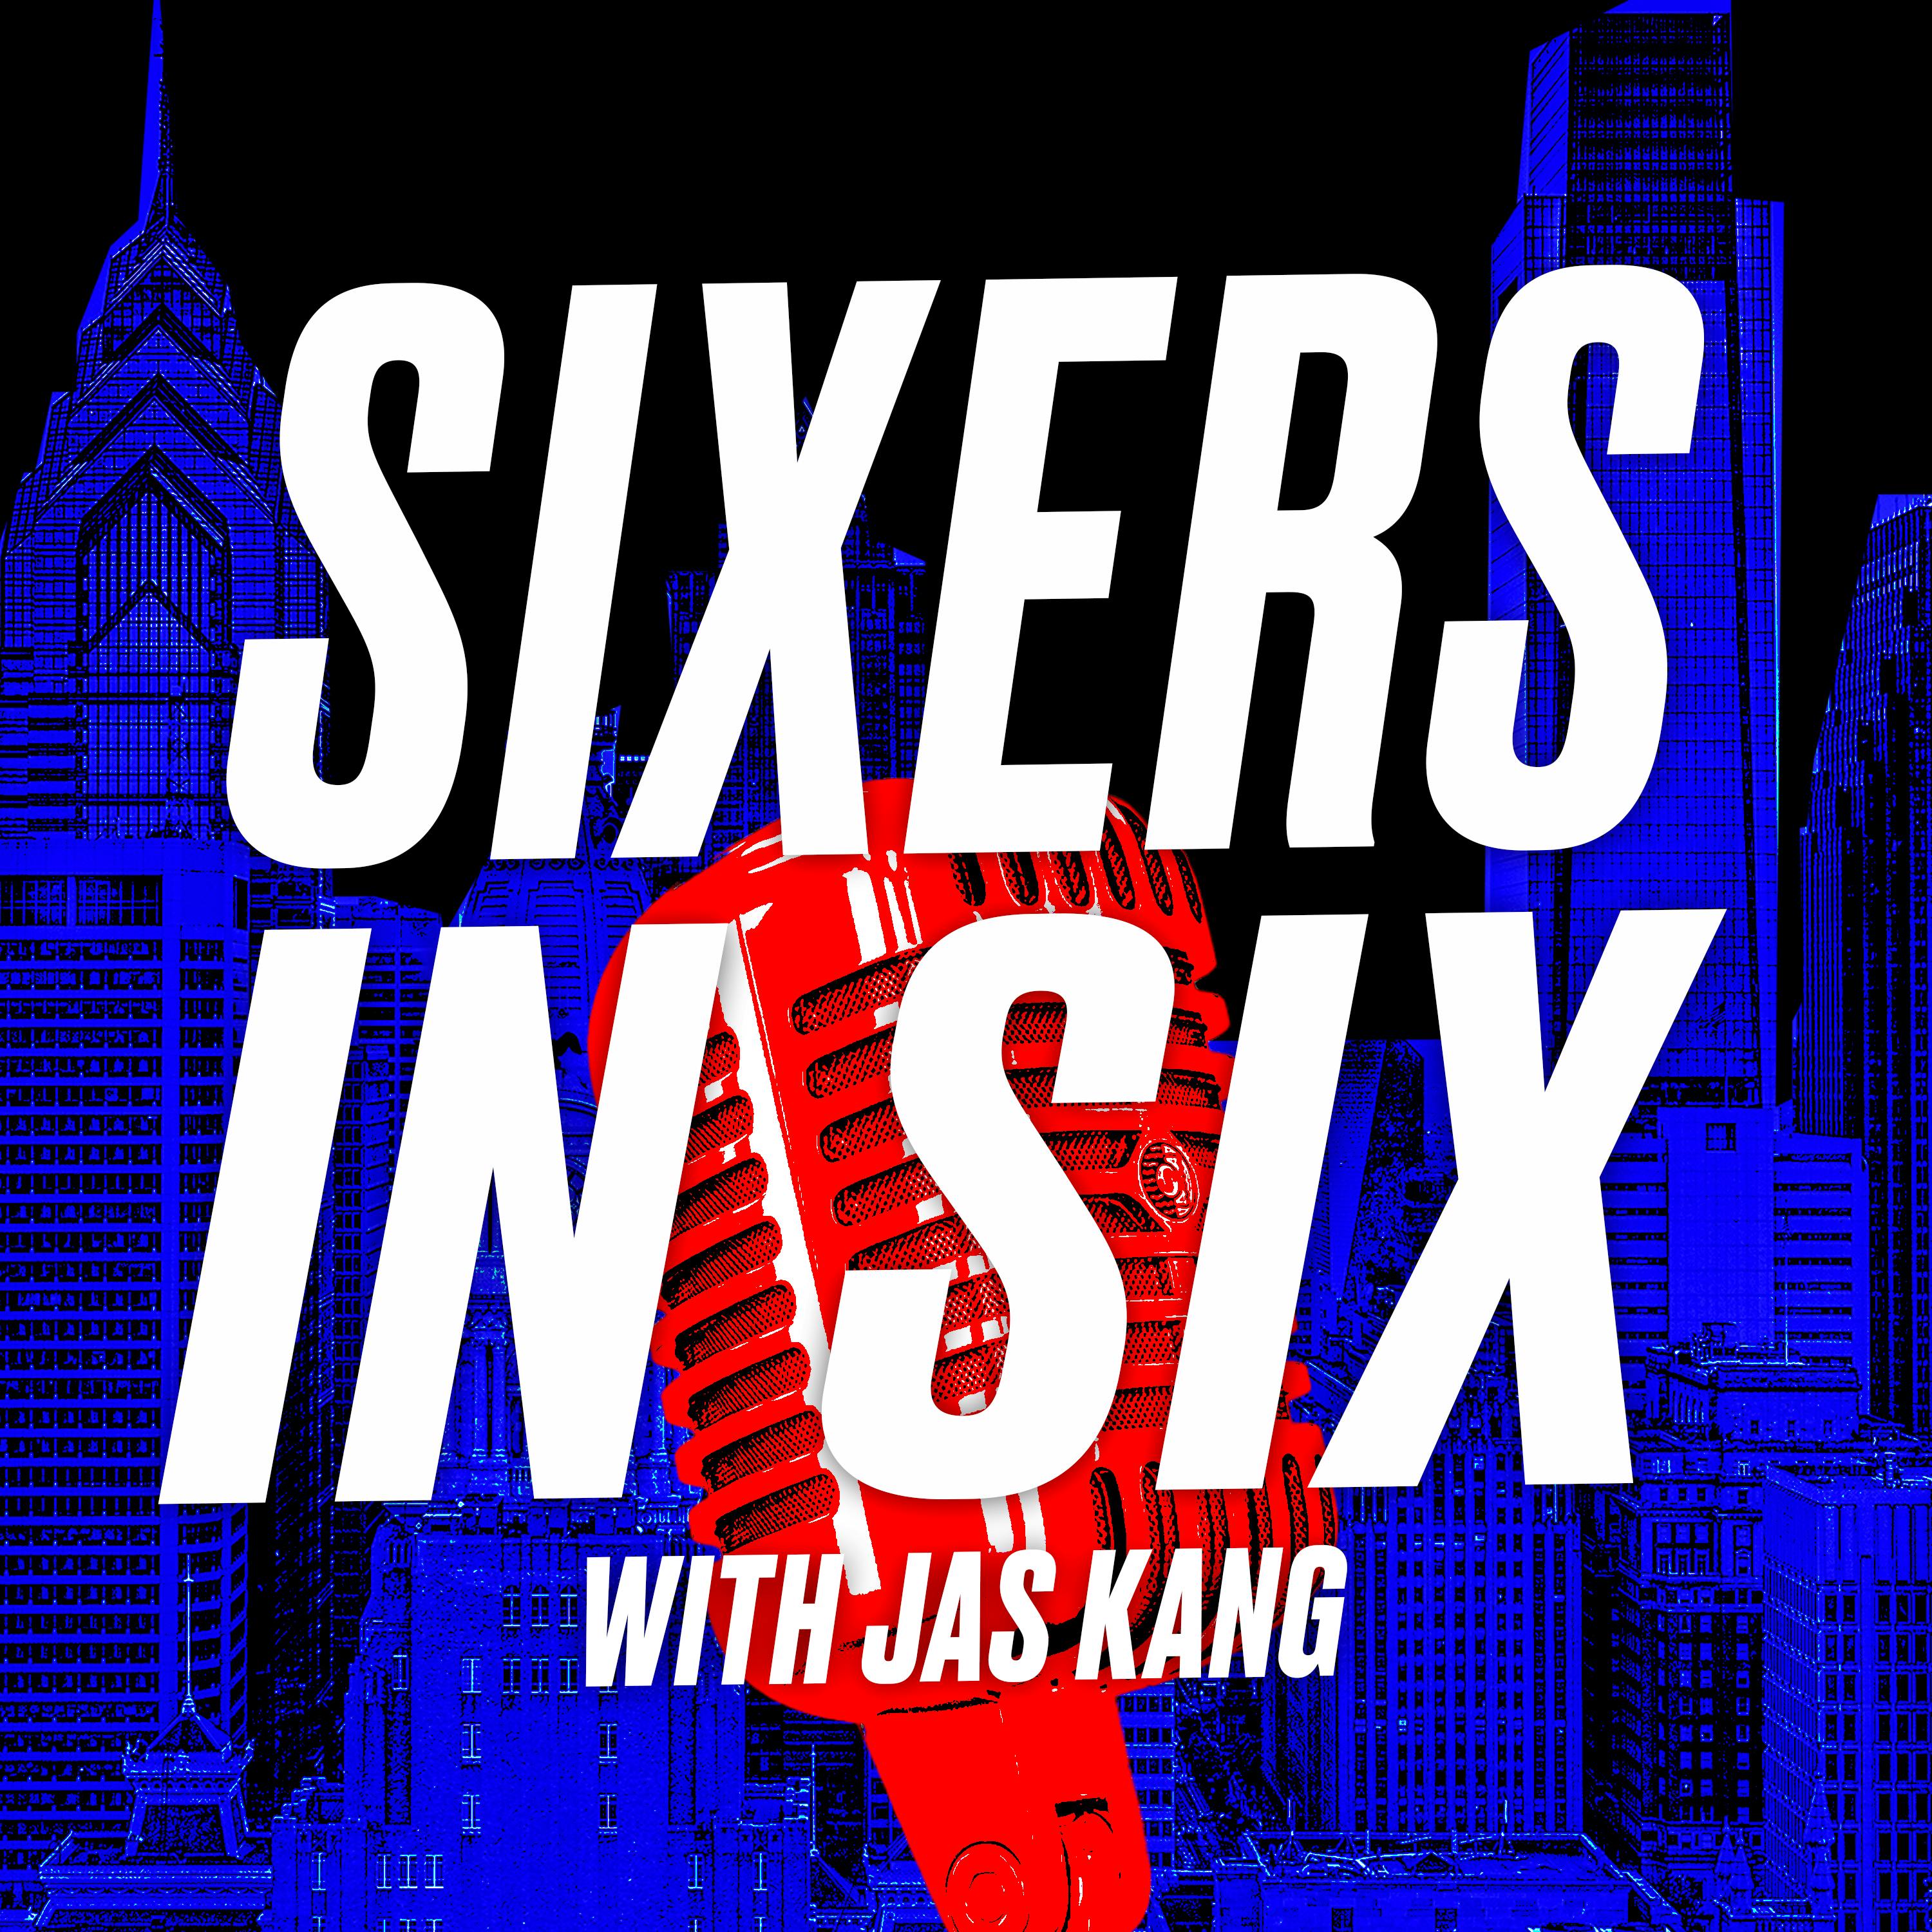 Joel Embiid had 32 points, James Harden finished with a triple-double in the Sixers win over the Blazers. Sixers in Six: With Jas Kang